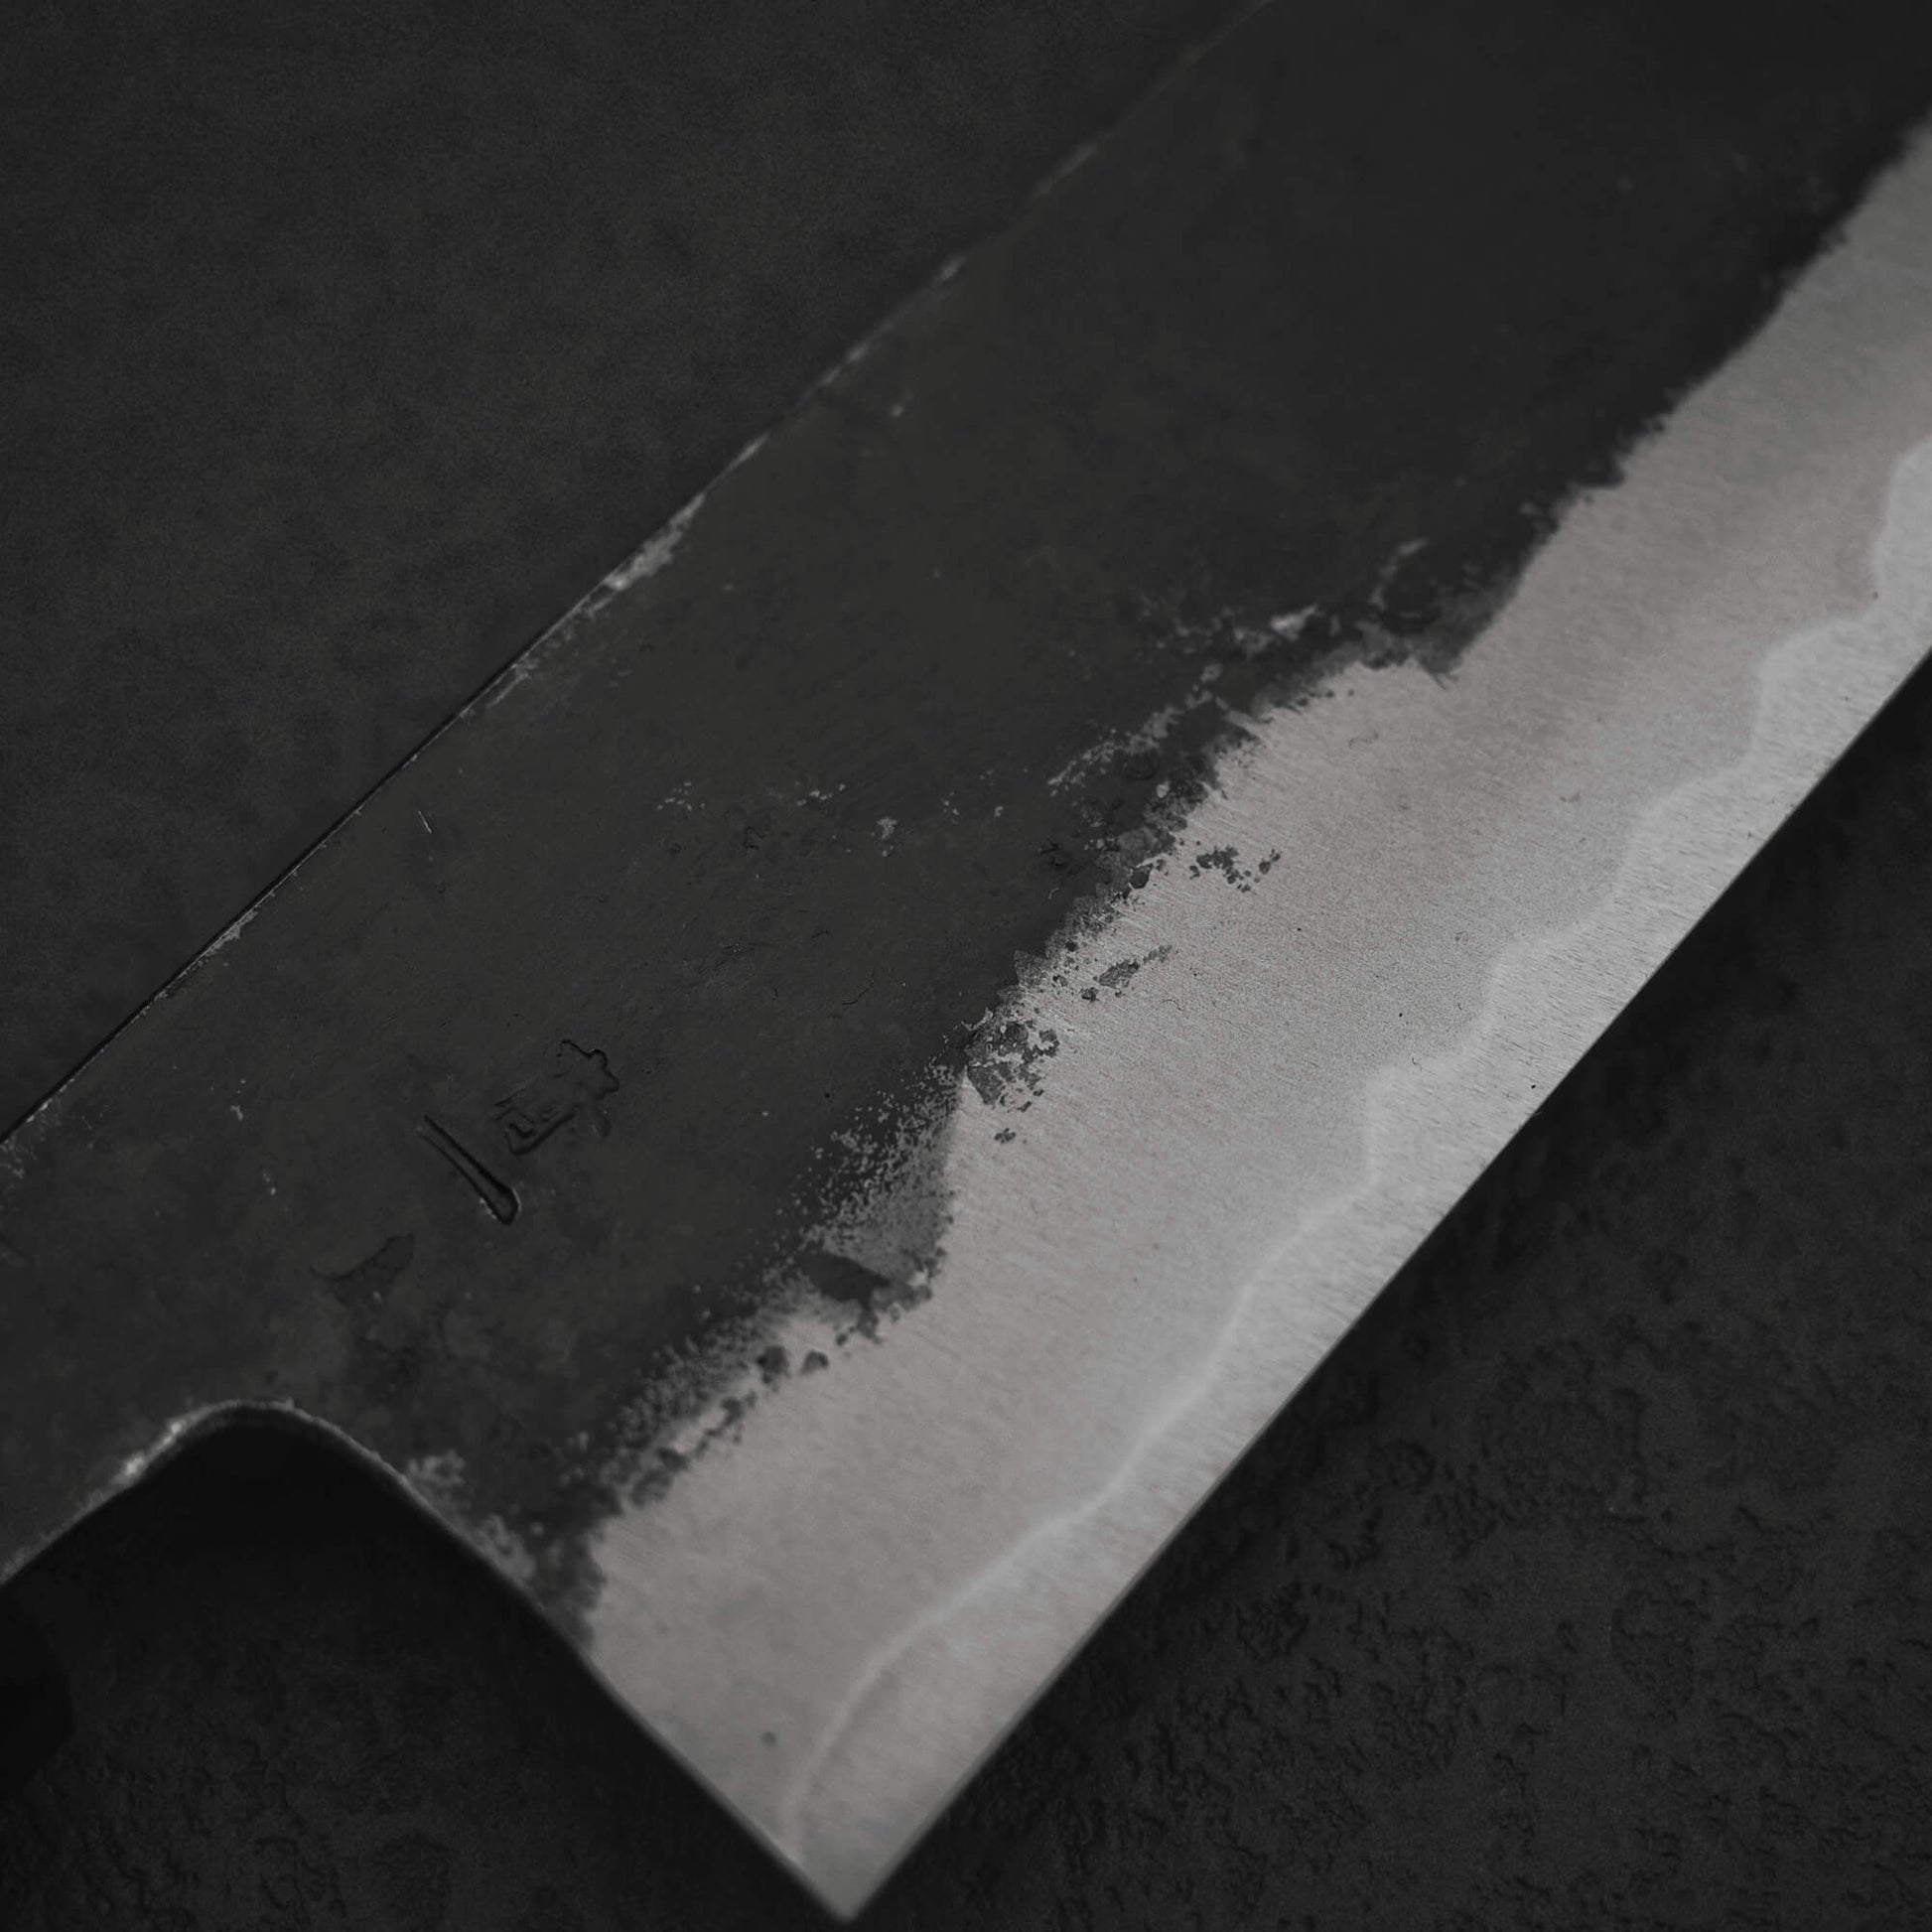 Close up view of Murata Buho kurouchi aogami#1 funayuki knife. Image focuses on the right side of the blade. 